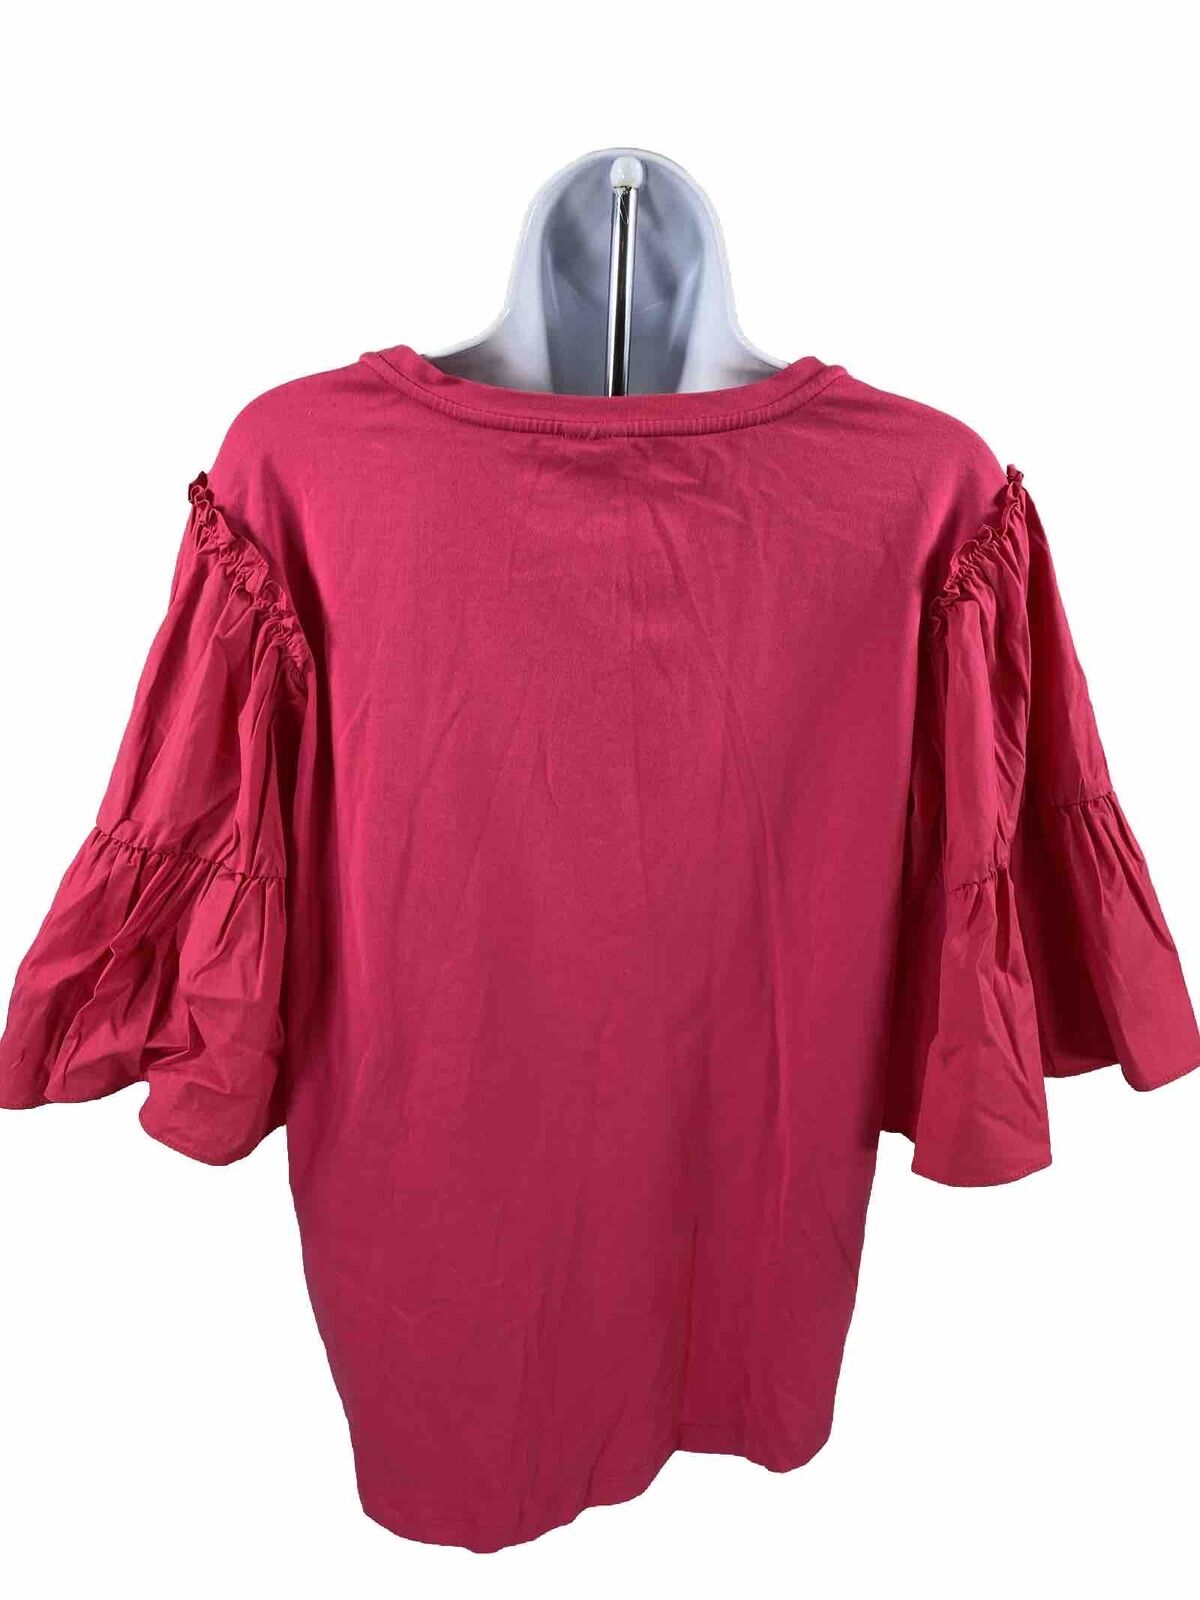 Chicos Women's Pink Knit 1/2 Tiered Sleeve Blouse - 1/M